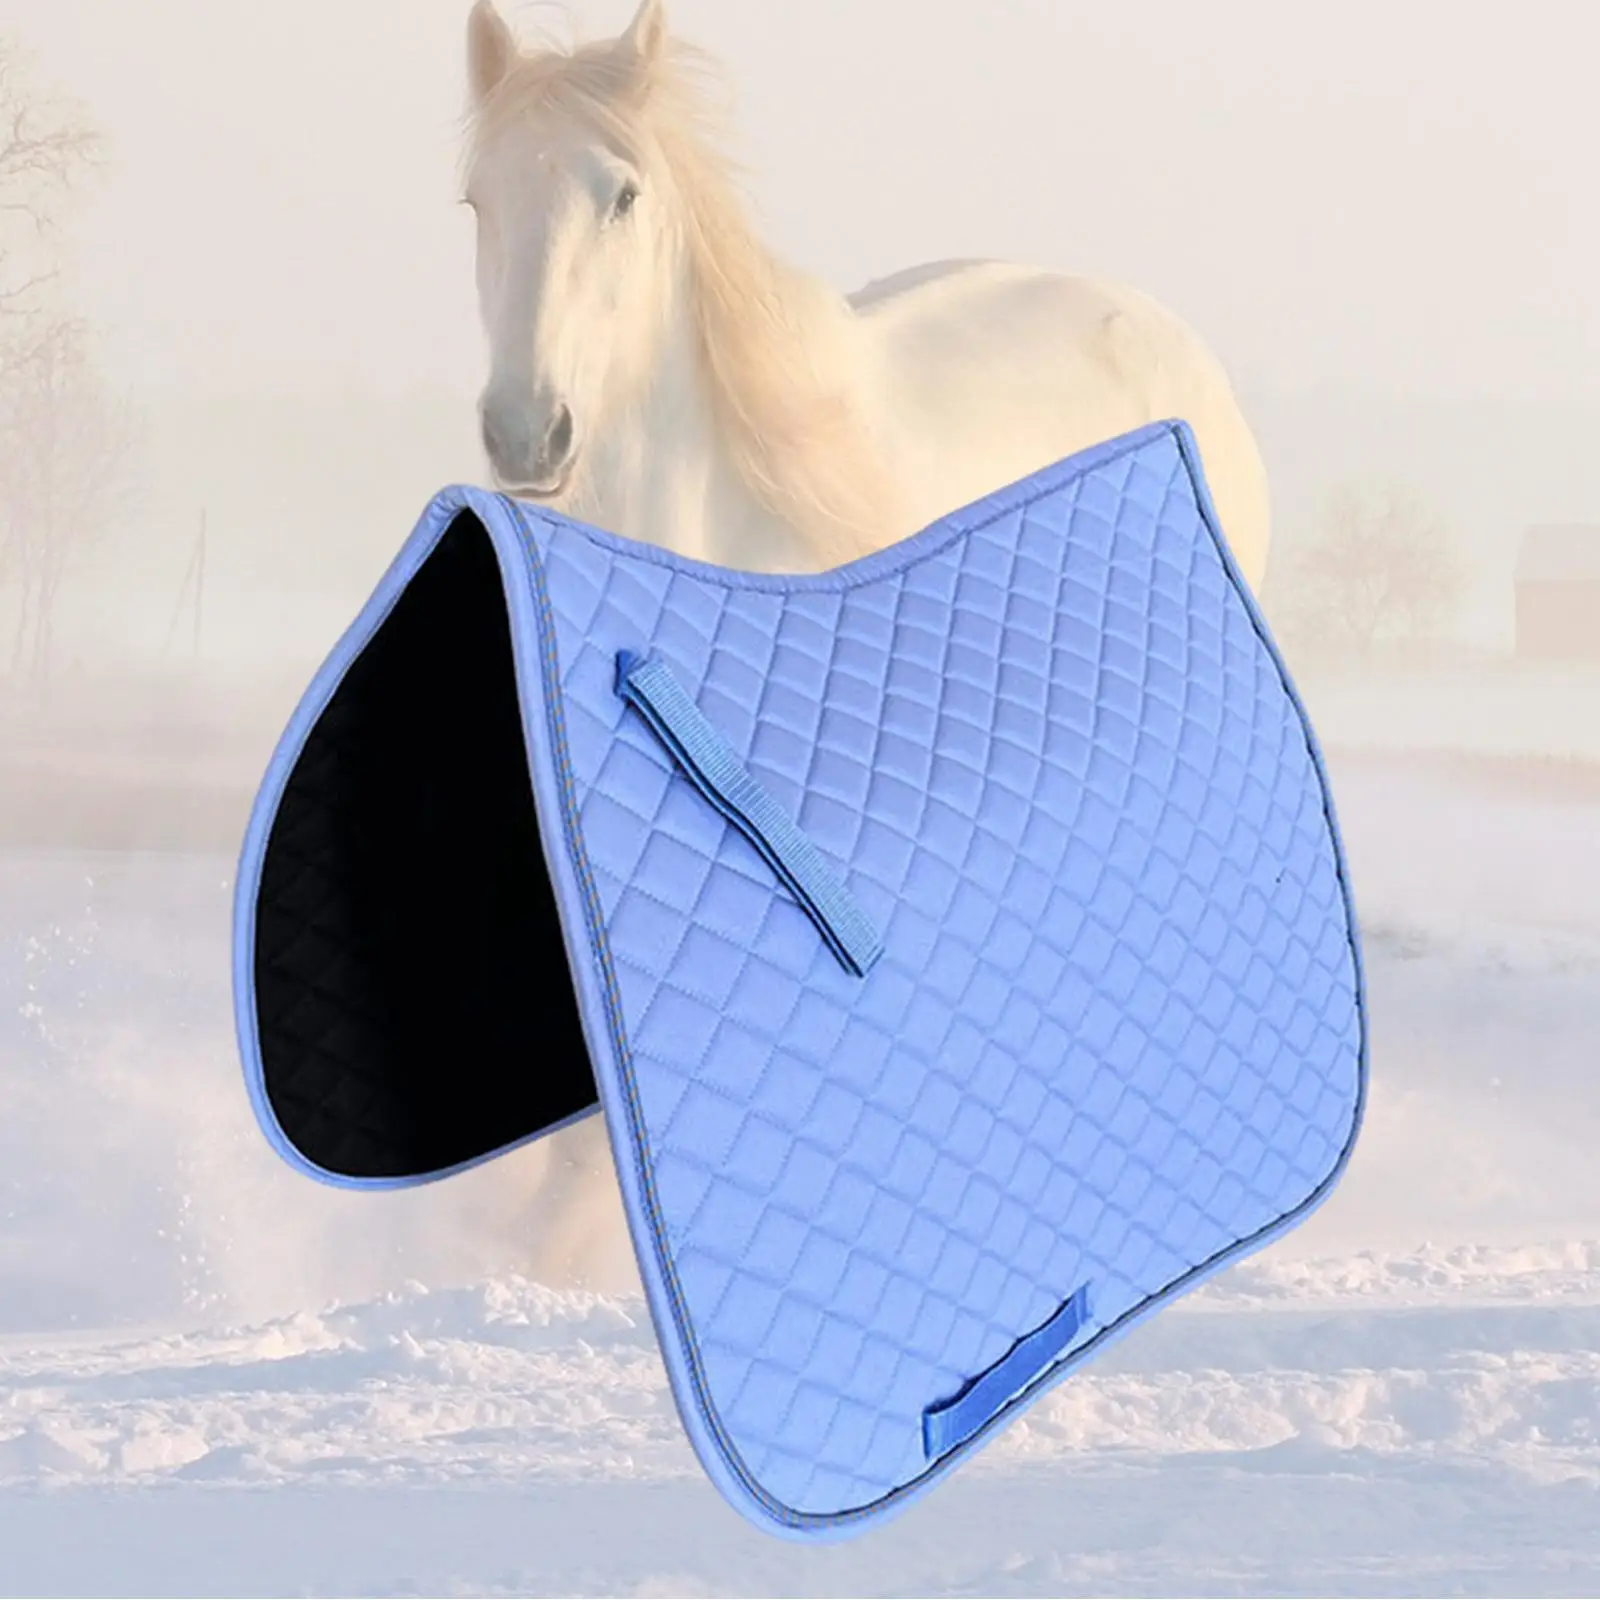 Horse Saddle Pad Portable Protective Lightweight AntiSlip Equestrian Riding Equipment Breathable Thickened Padding Dressage Pad